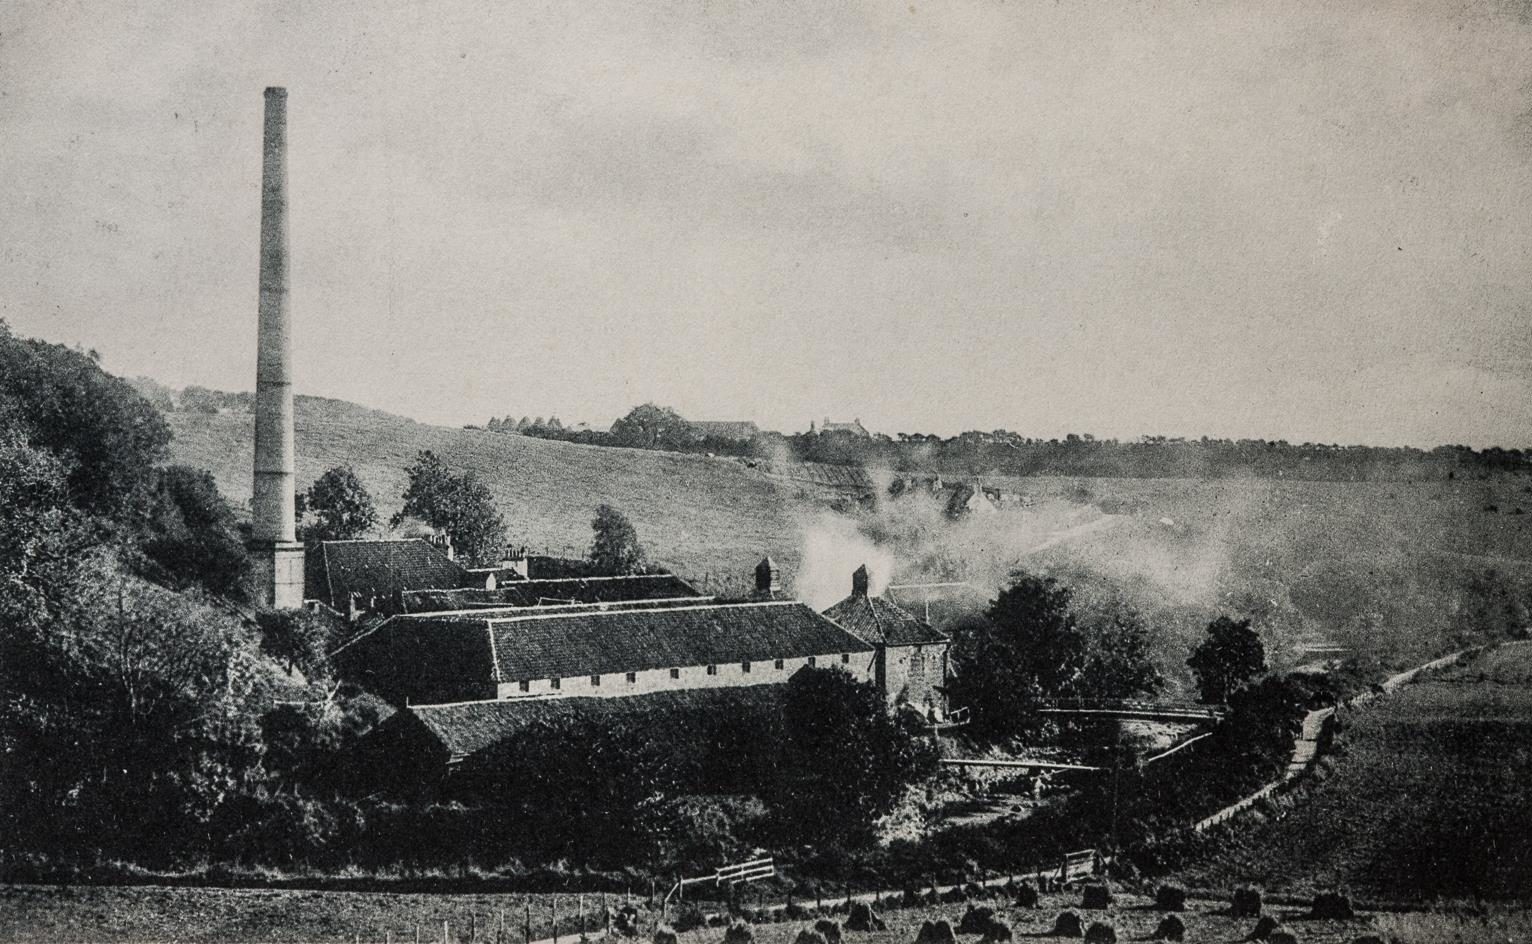 Glenury Royal Distillery as it looked in the early 1900s. Picture courtesy of Martin Sim.